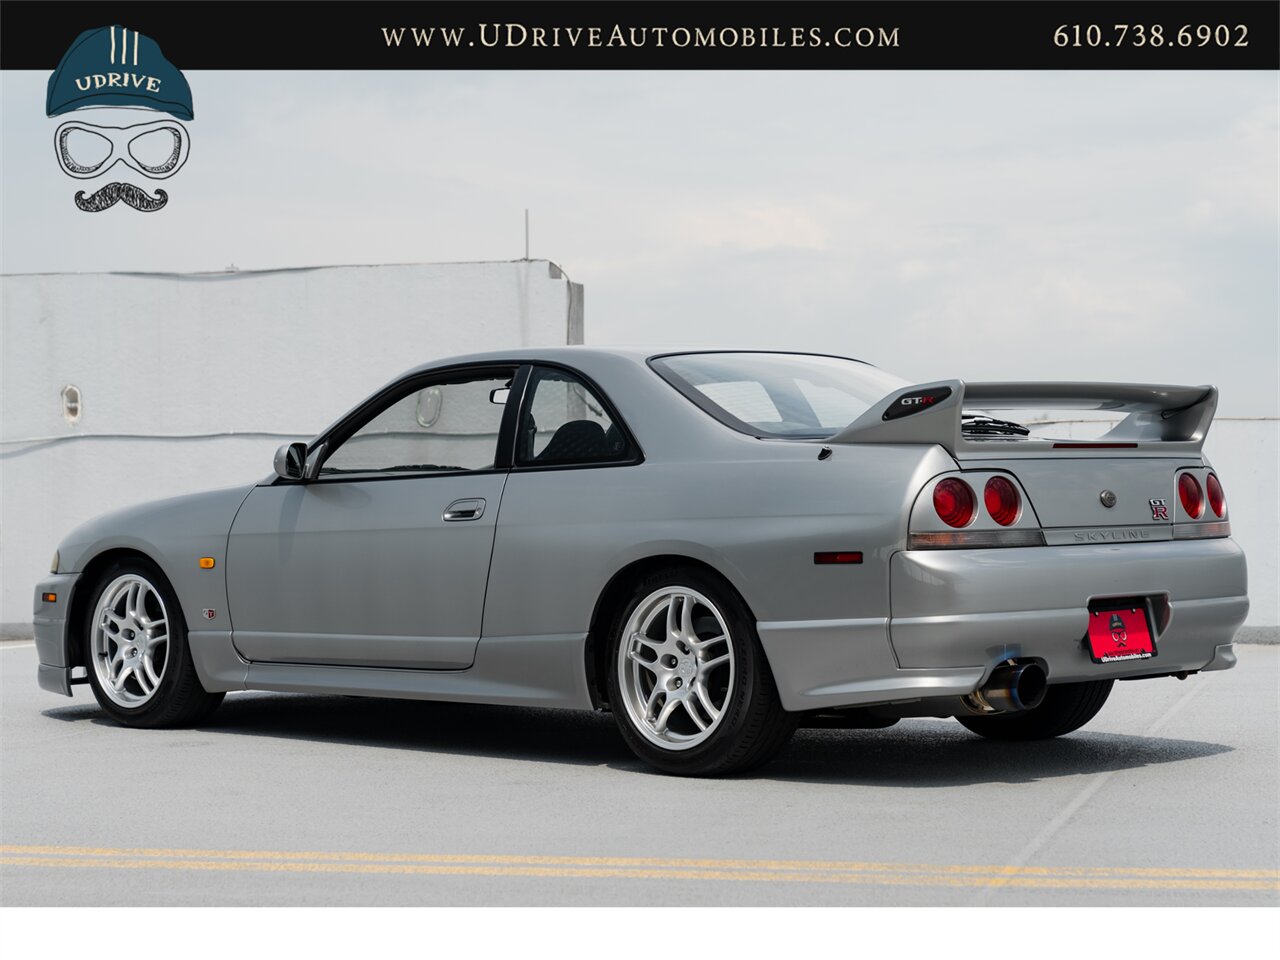 1997 Nissan Skyline GT-R R33 28k Miles Collector Grade  Motorex Legally Imported Titled Federalized Service History - Photo 23 - West Chester, PA 19382